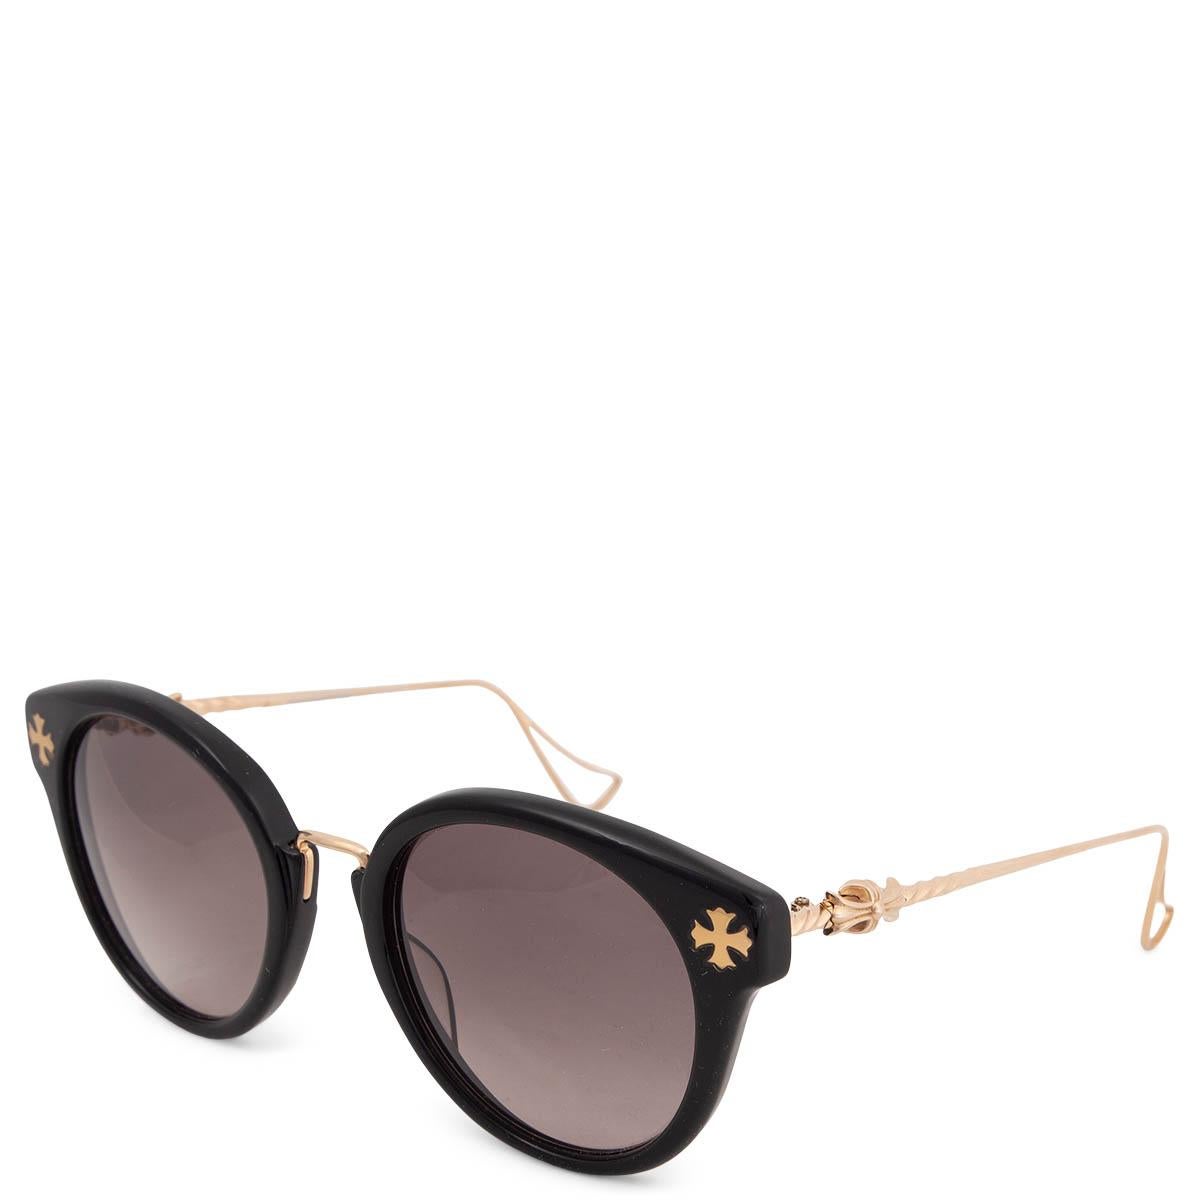 100% authentic Chrome Hearts Jenna Se Quoi sunglasses in black acetate and embellished gold plated metal tempels with gradient grey lenses. Have been worn and are in excellent condition. Come without case.

Measurements
Model	Jenna Se Quoi